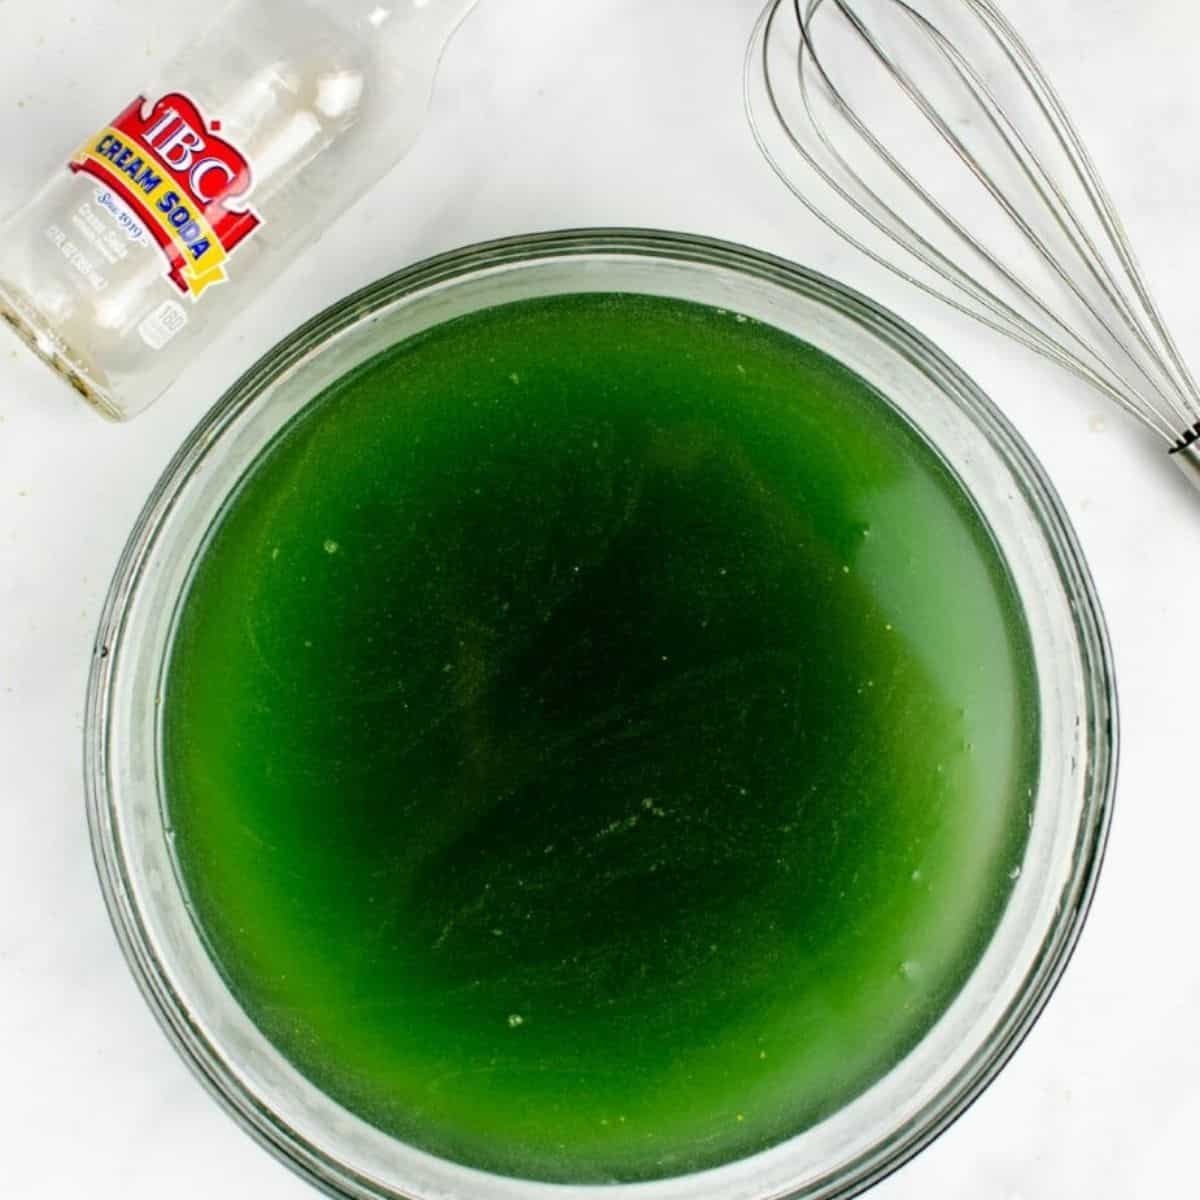 the ingredients to make a green festive Halloween cocktail